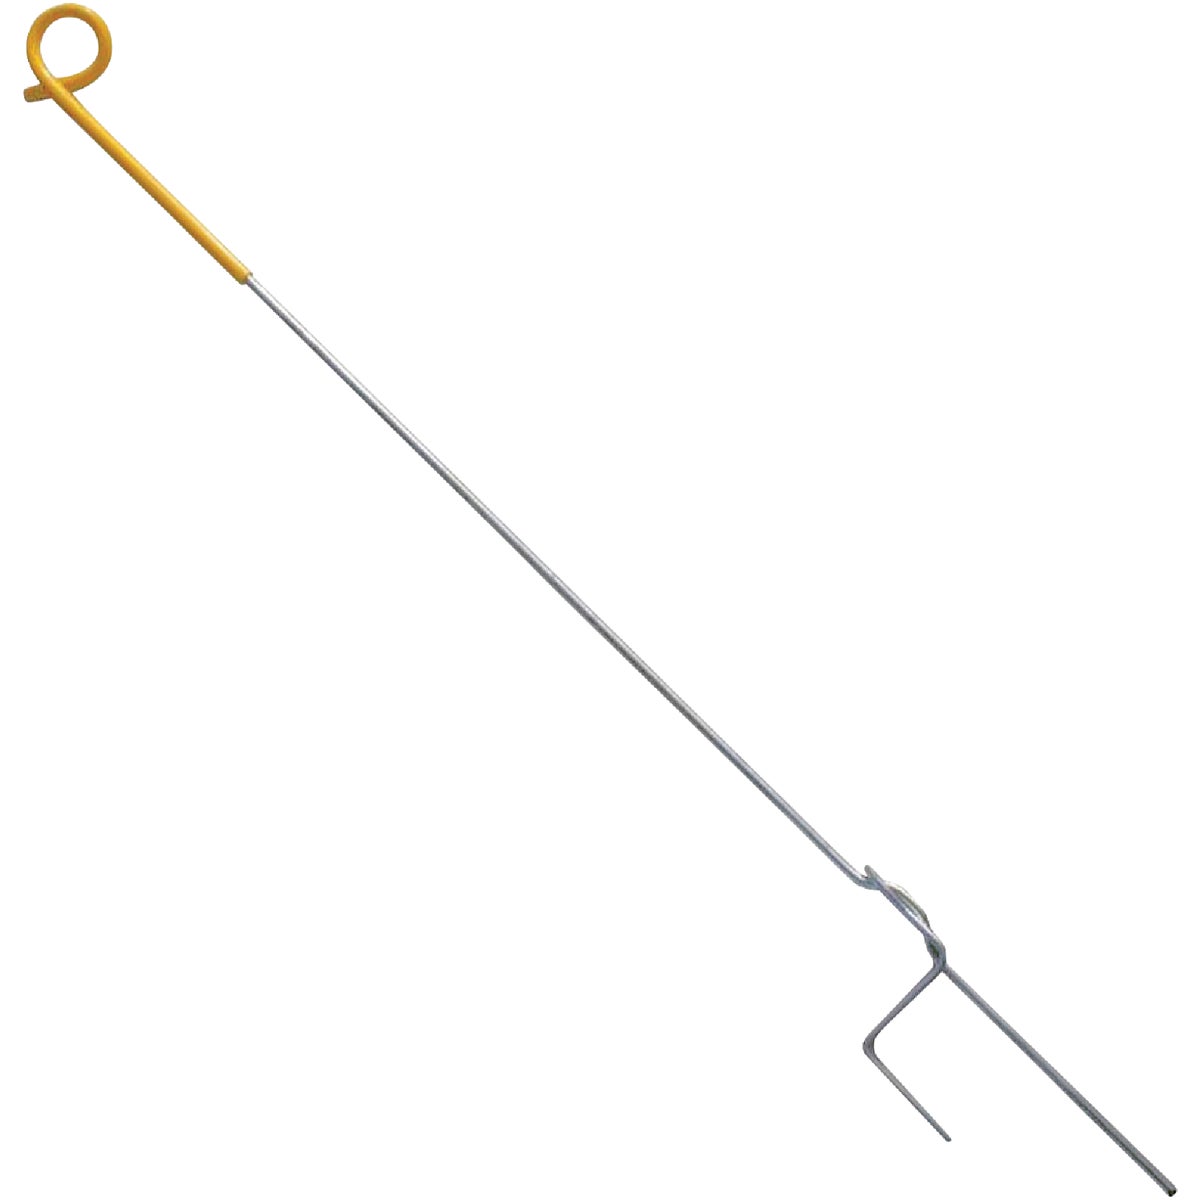 Item 753123, Pig tail step-in post ideal for temporary electric fencing for grazing and 